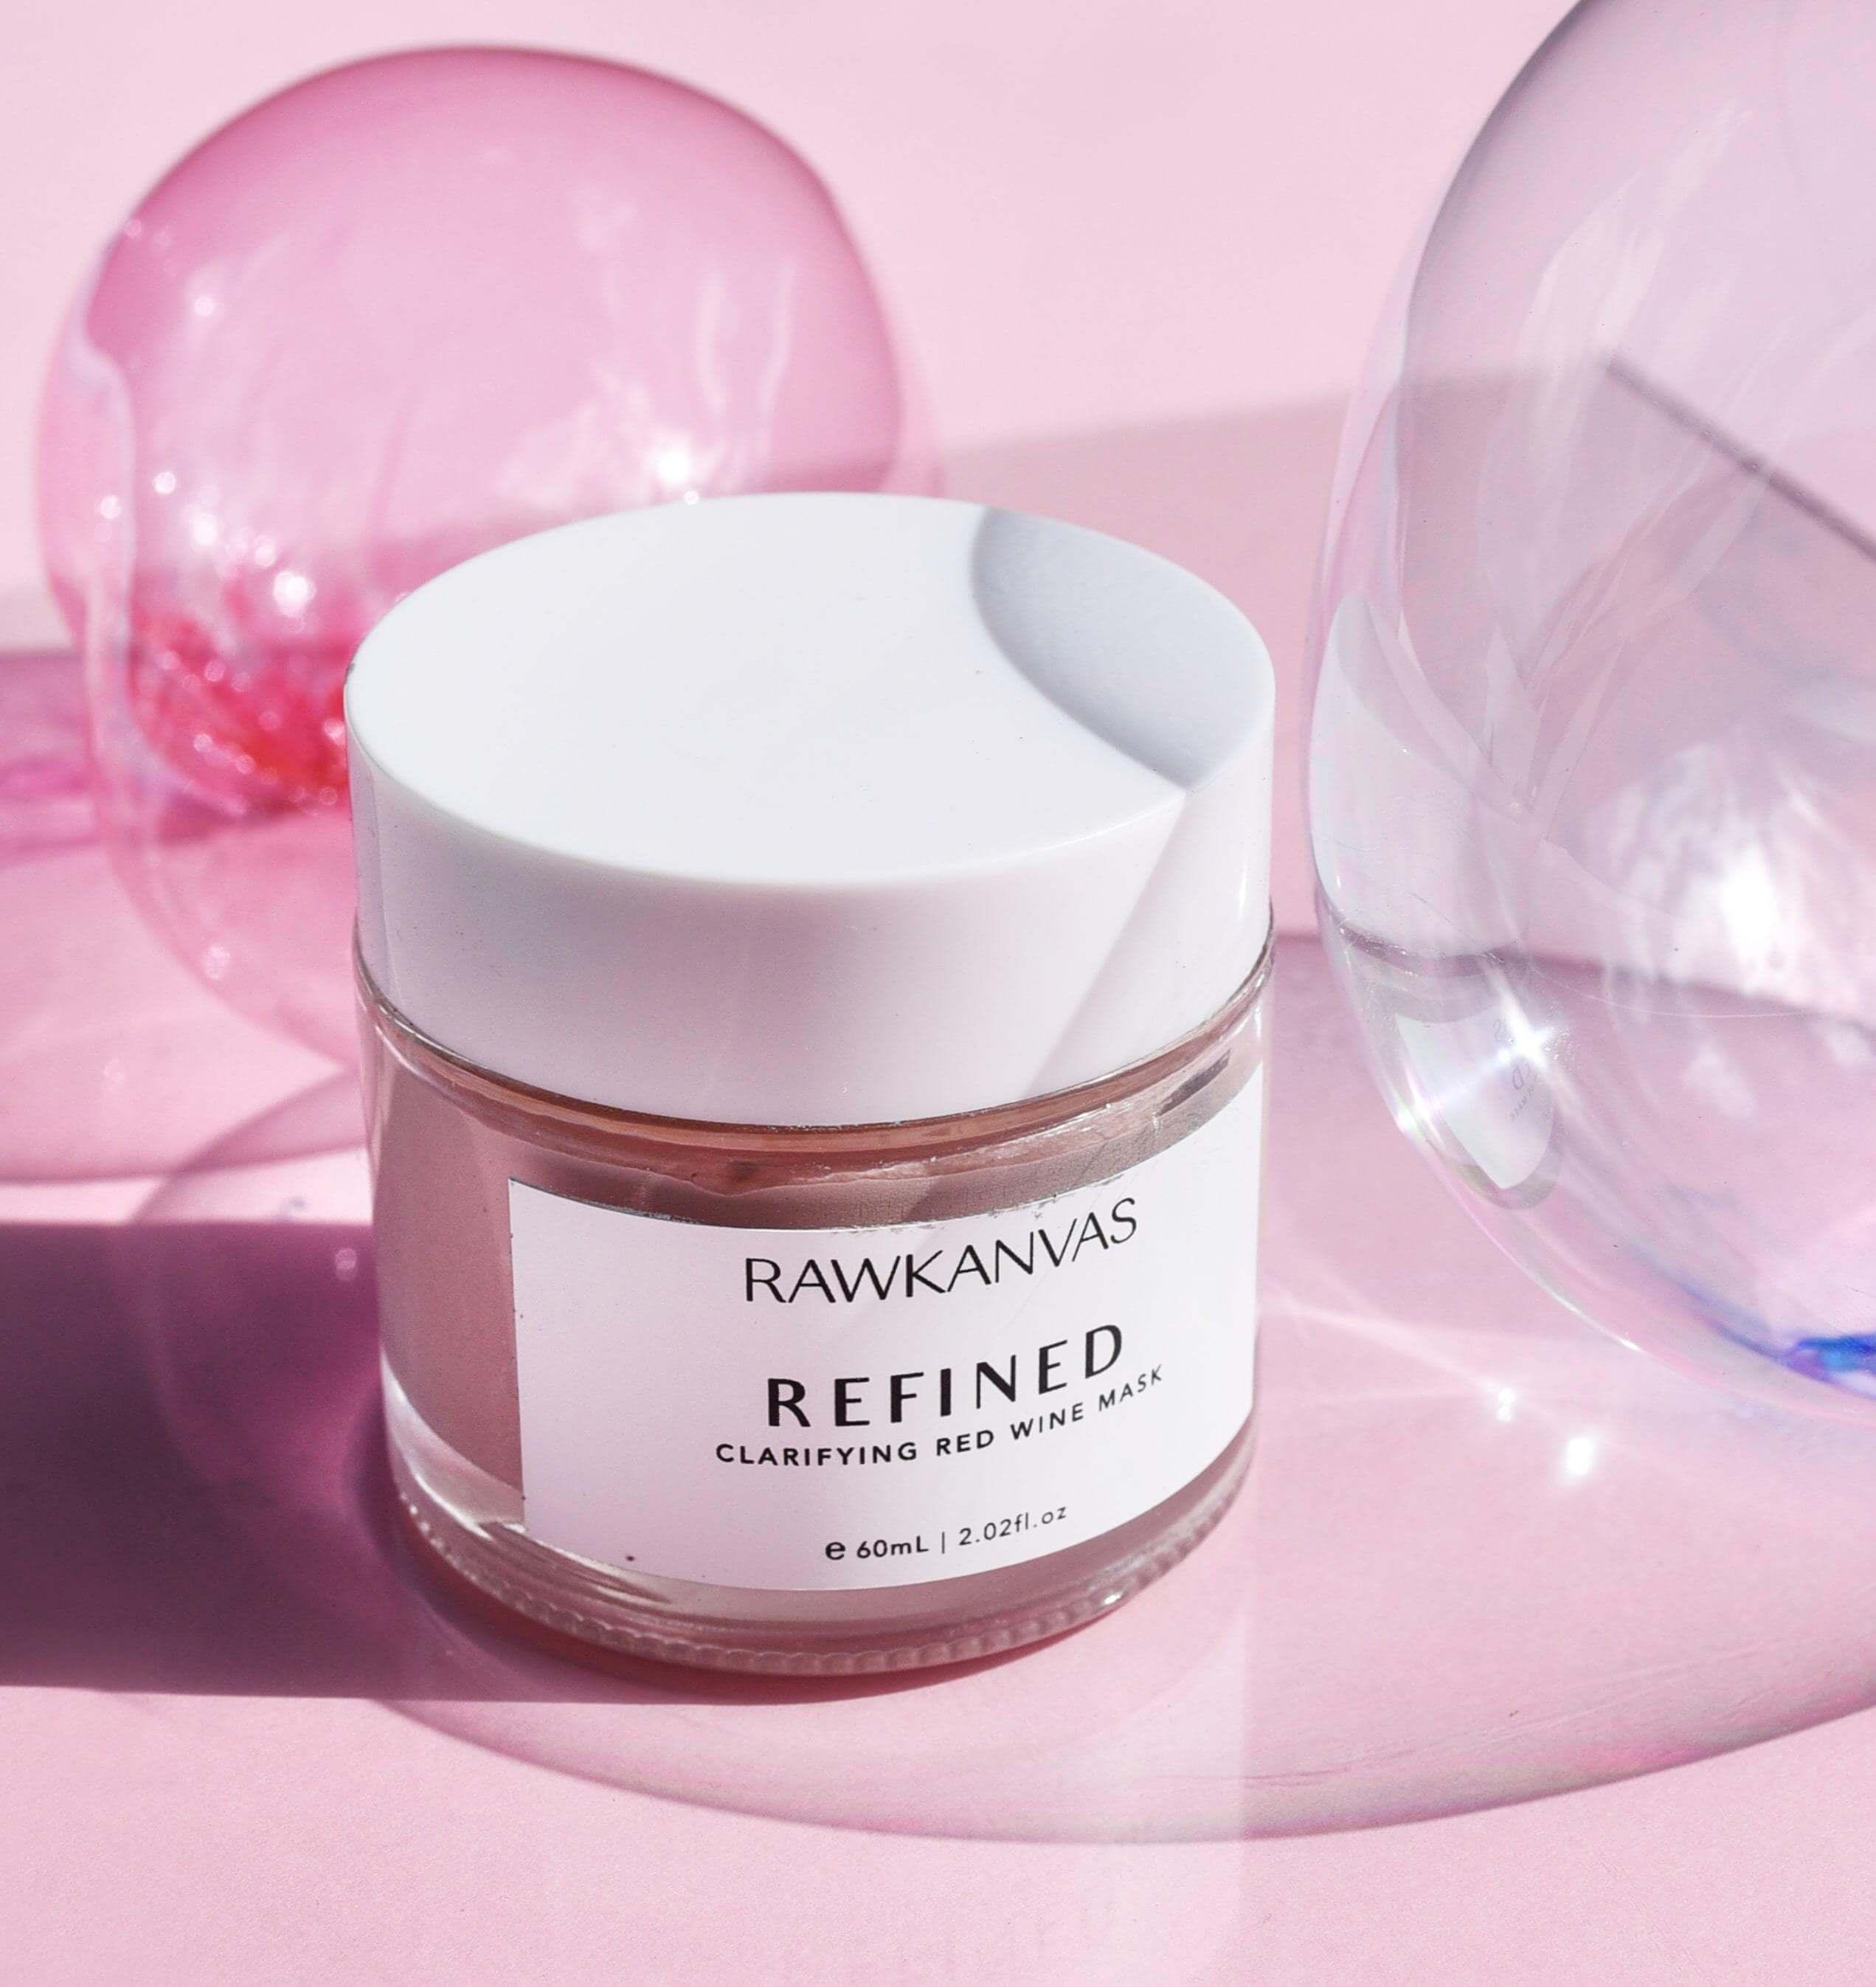 Image of RAWKANVAS Refined clarifying red wine mask to buff and clear